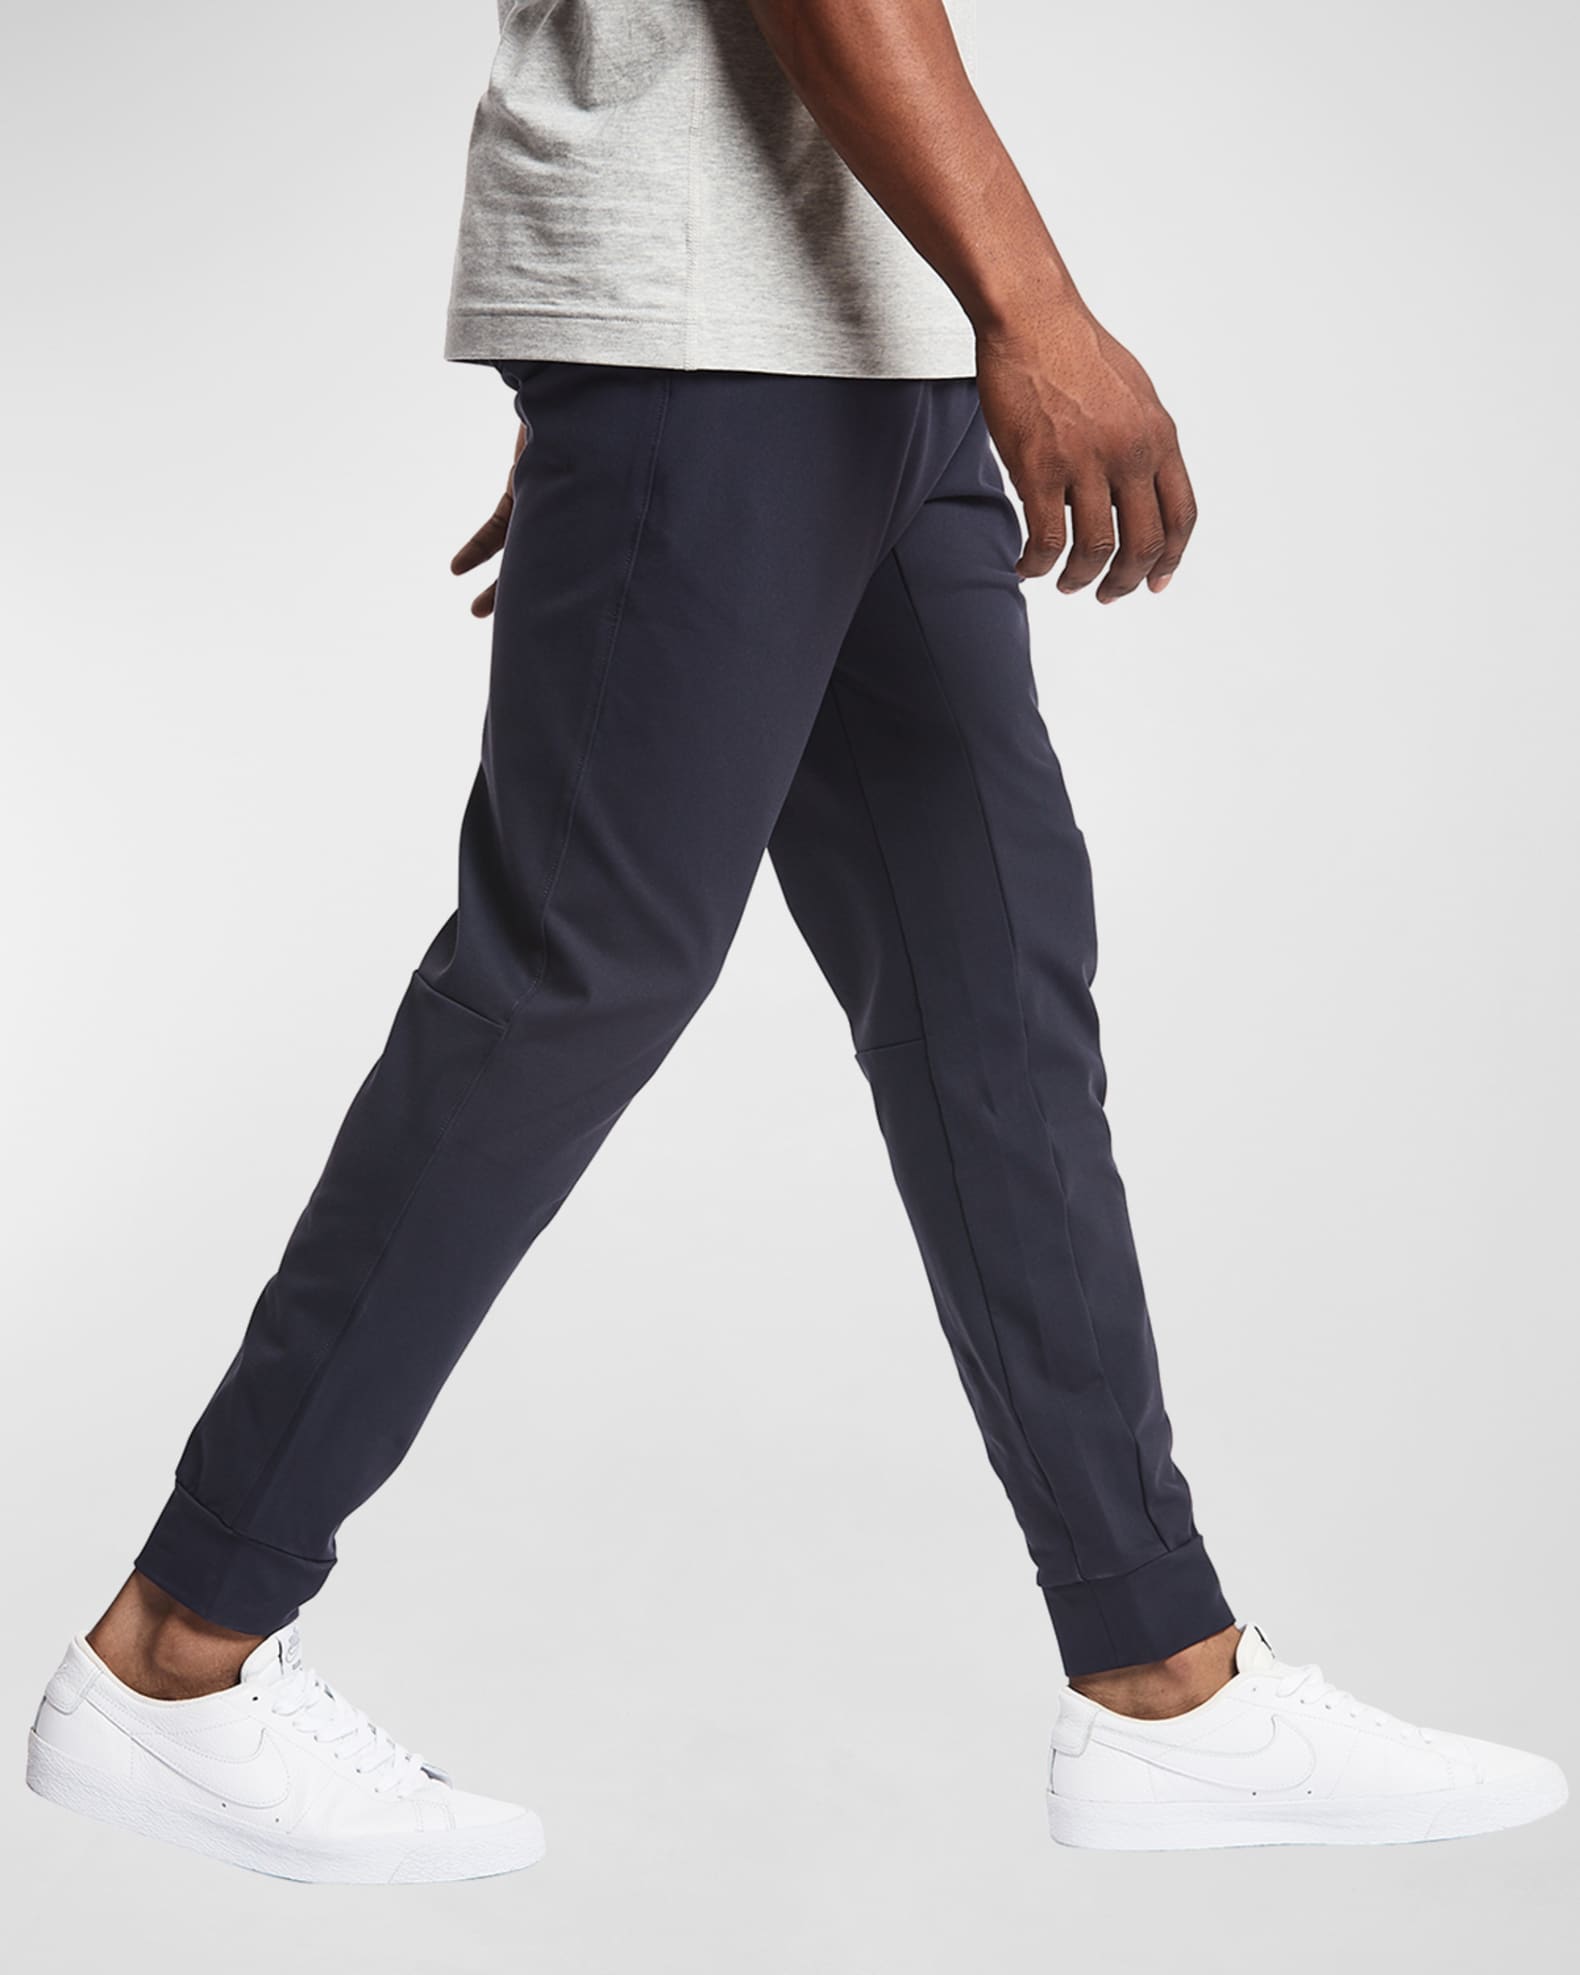 Public Rec Men's All Day Every Day Jogger Pants | Neiman Marcus